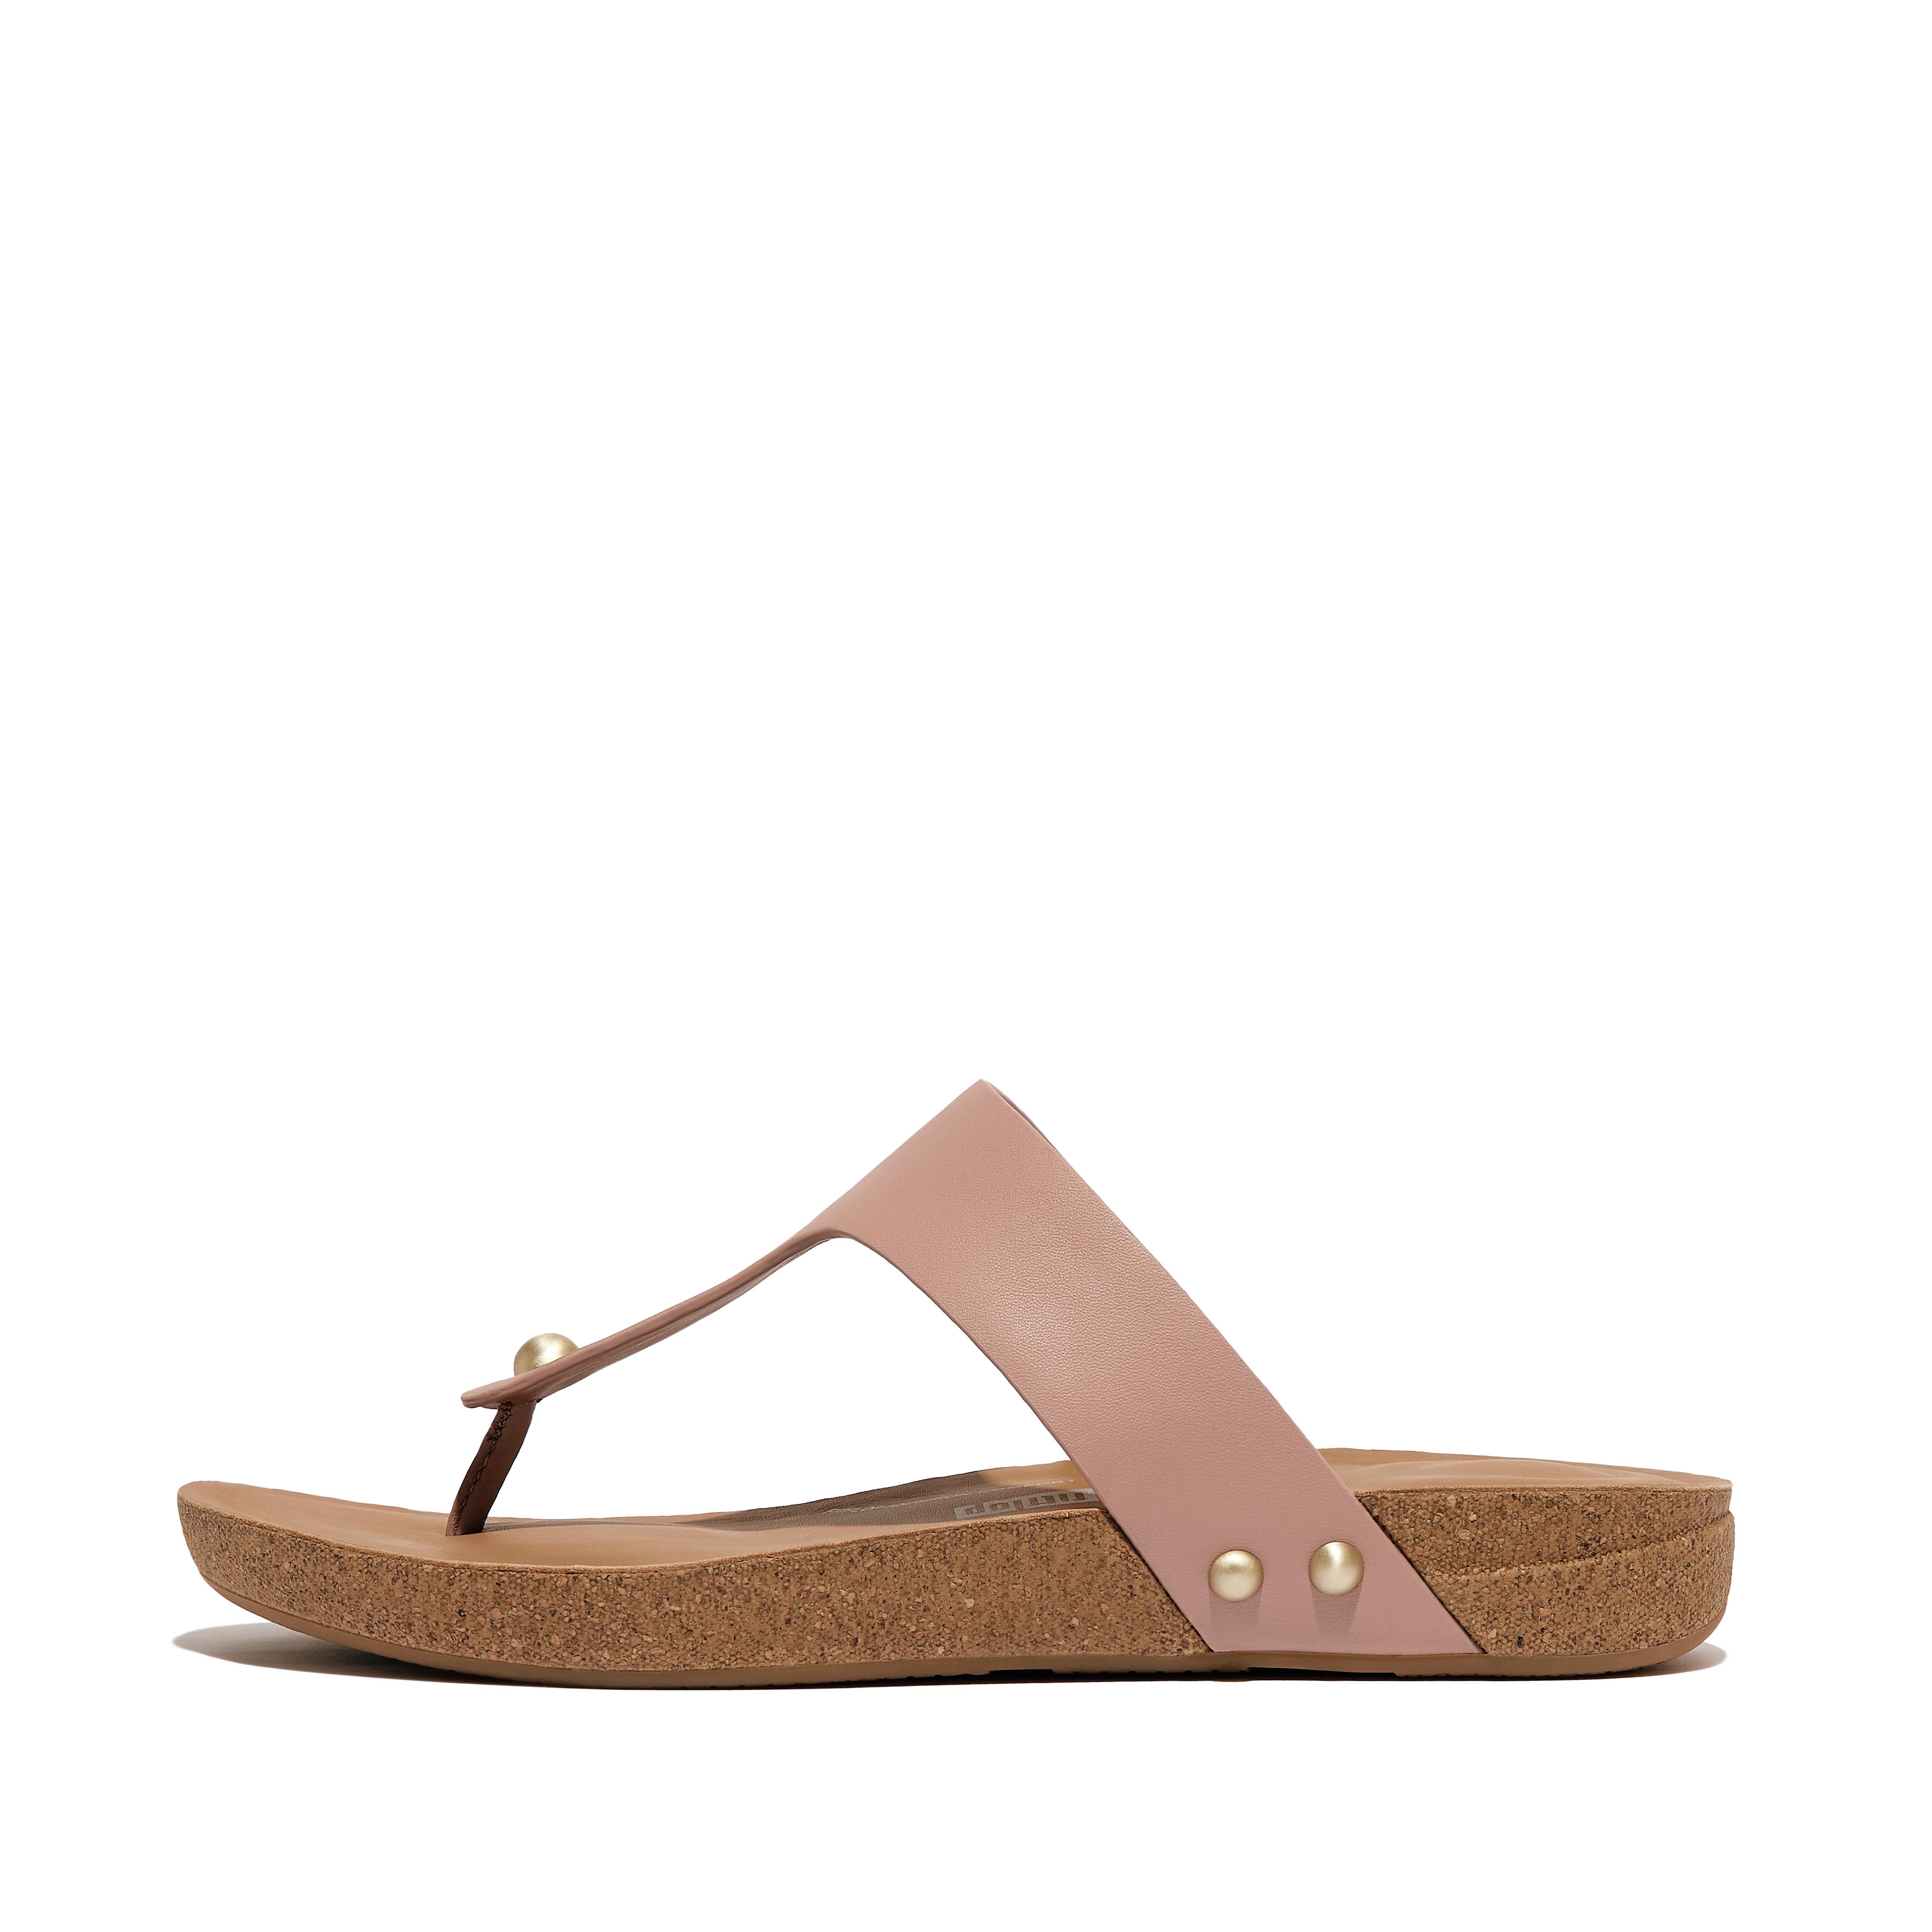 Fitflop Leather Toe-Post Sandals,Beige Buff